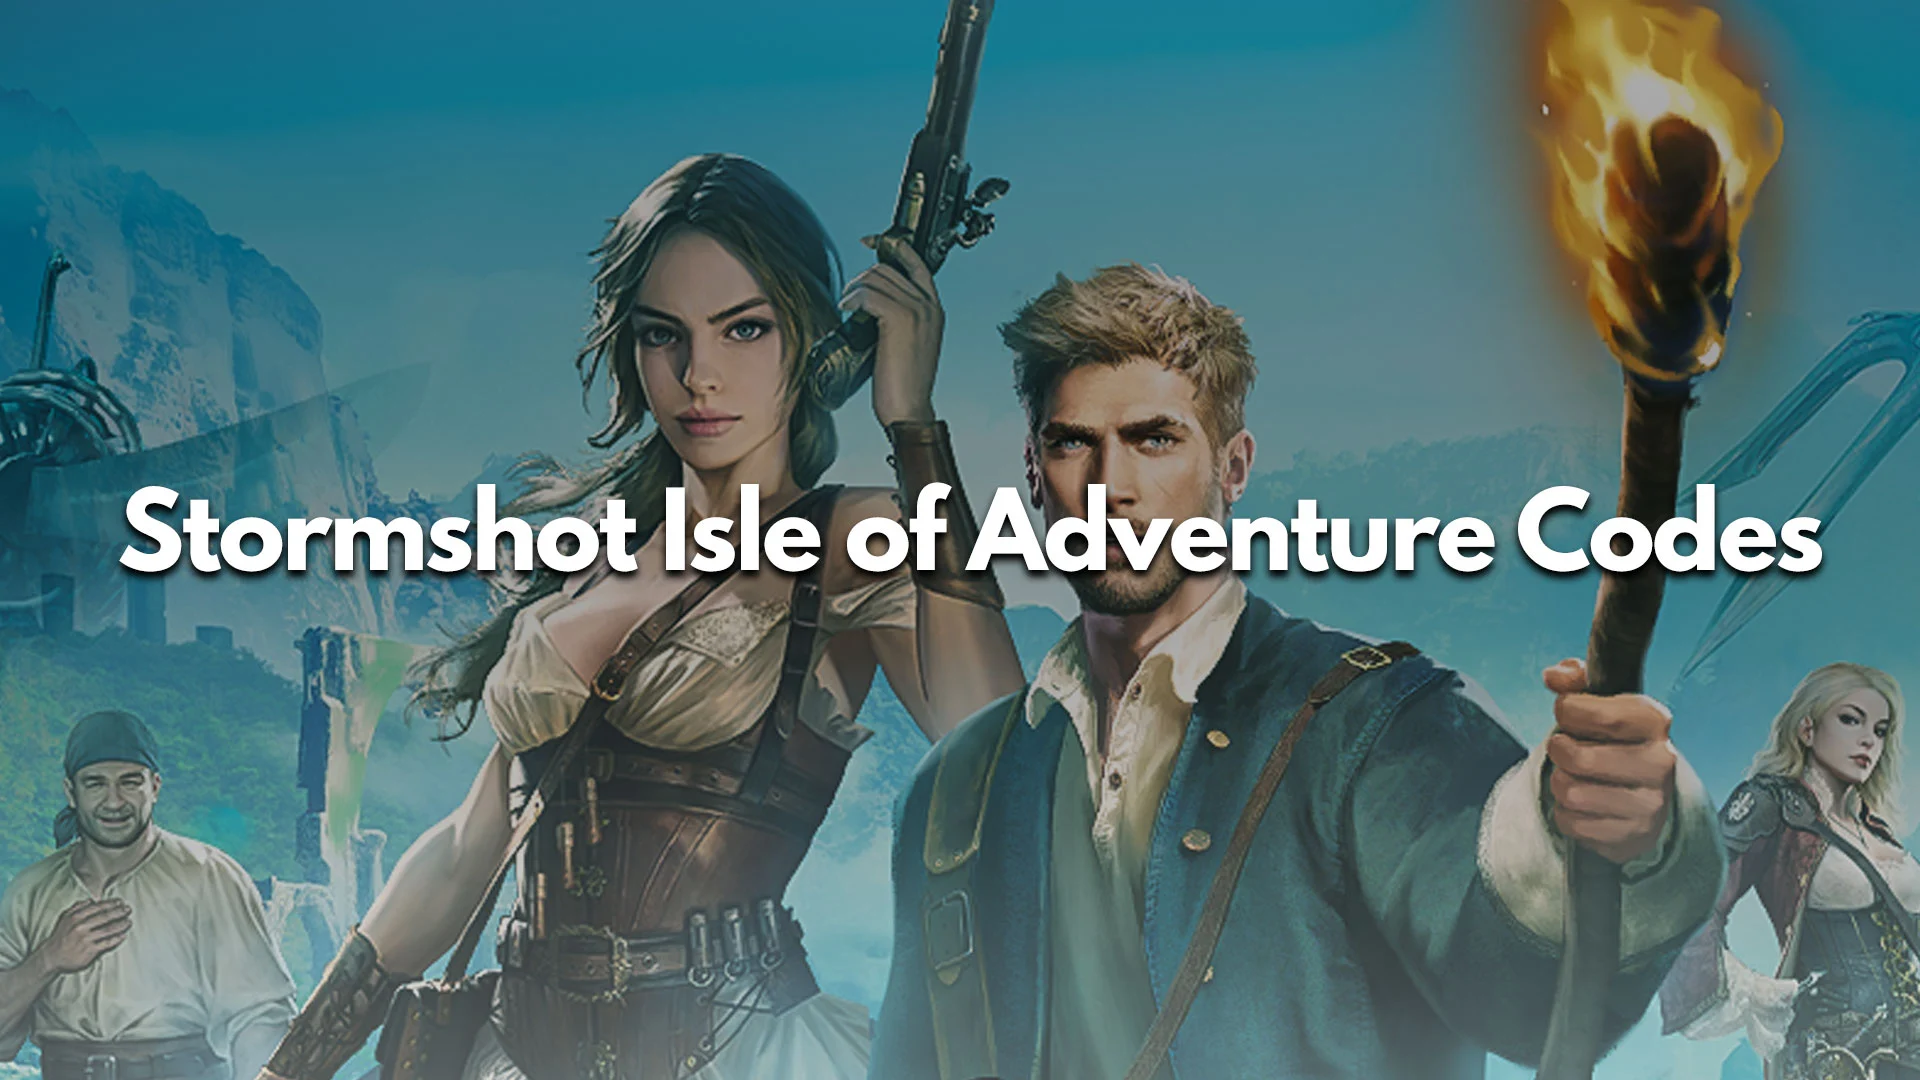 download the new version for mac Stormshot: Isle of Adventure